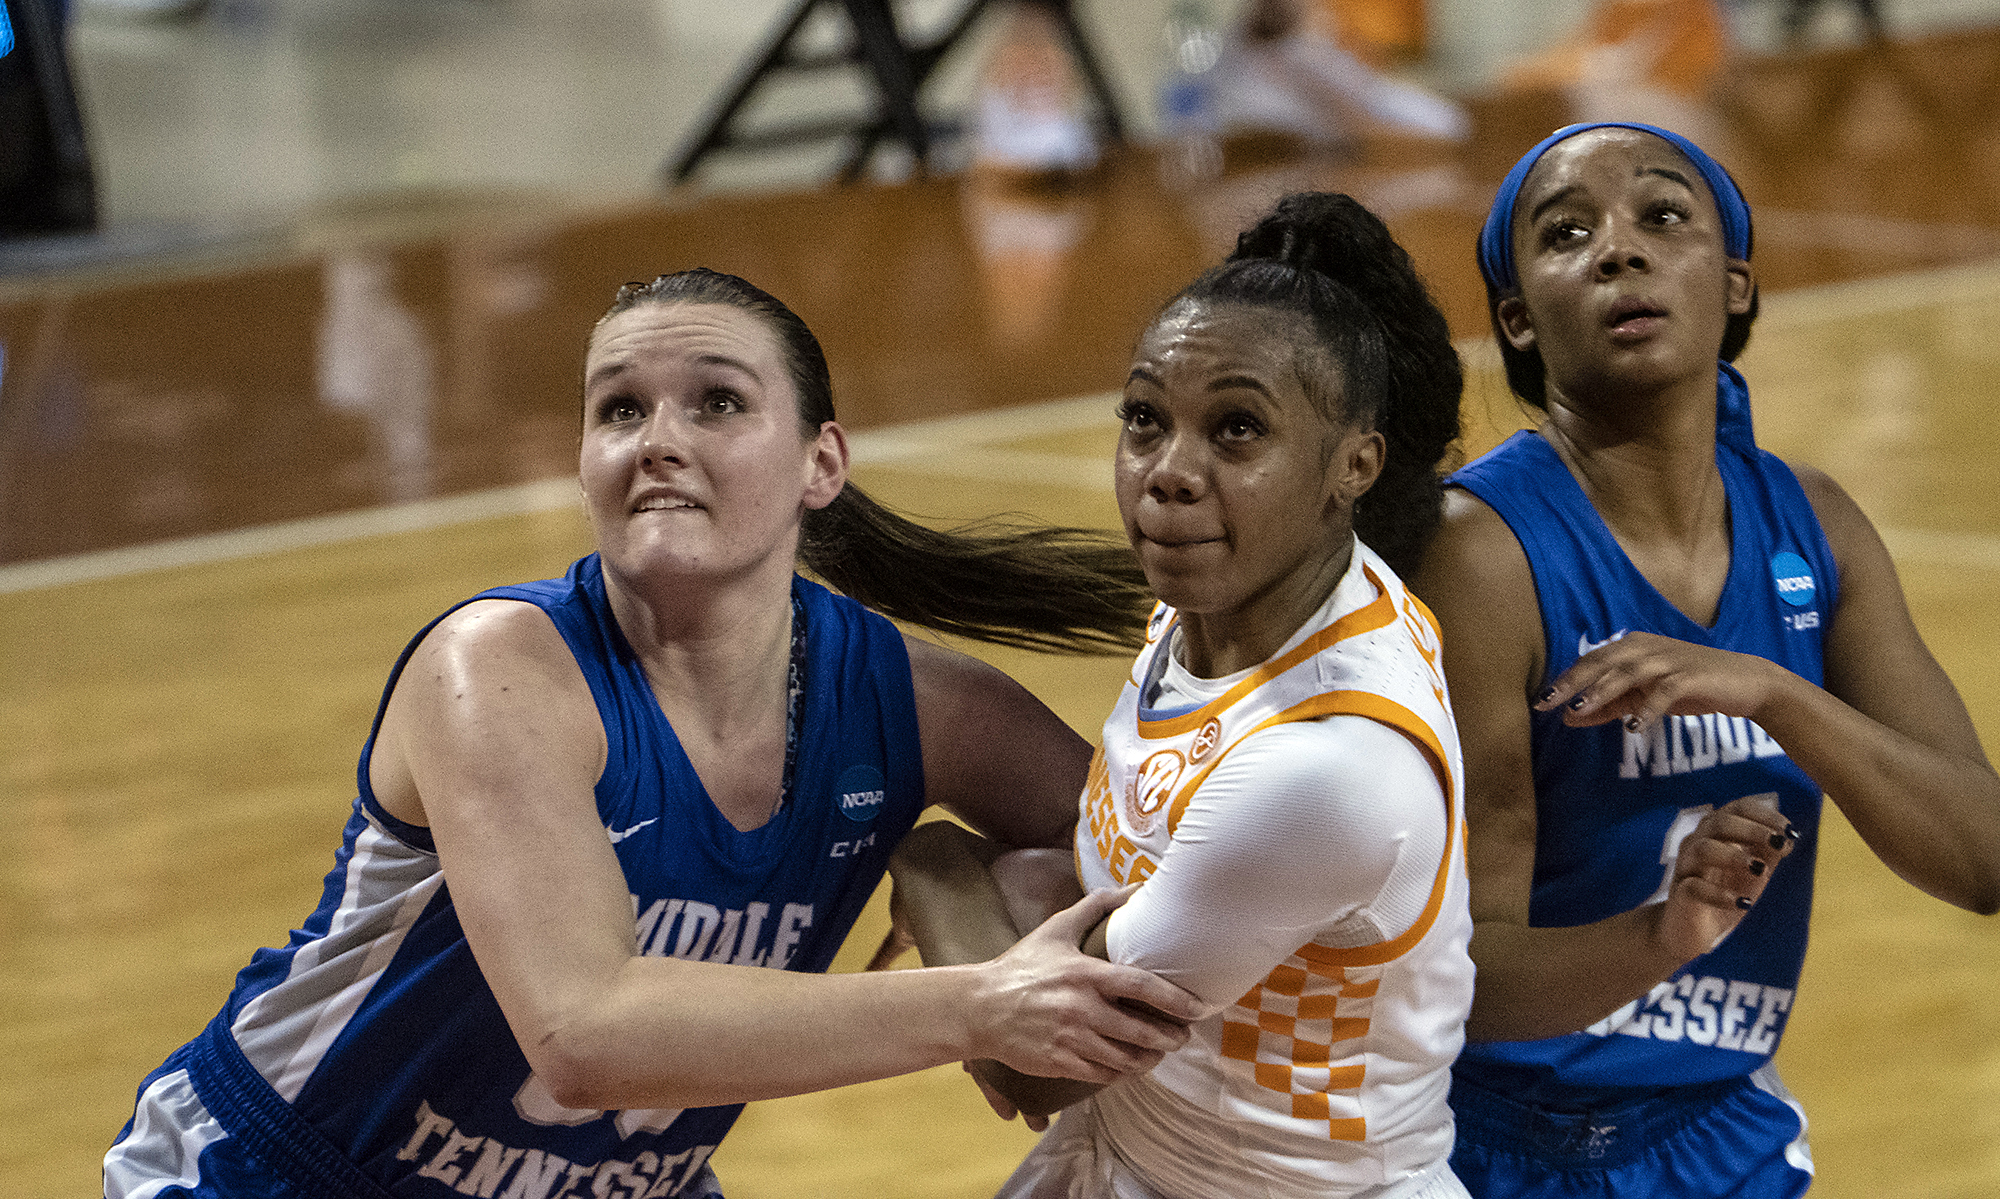 PHOTO GALLERY: Lady Vols 1st Rd win over Middle Tennessee